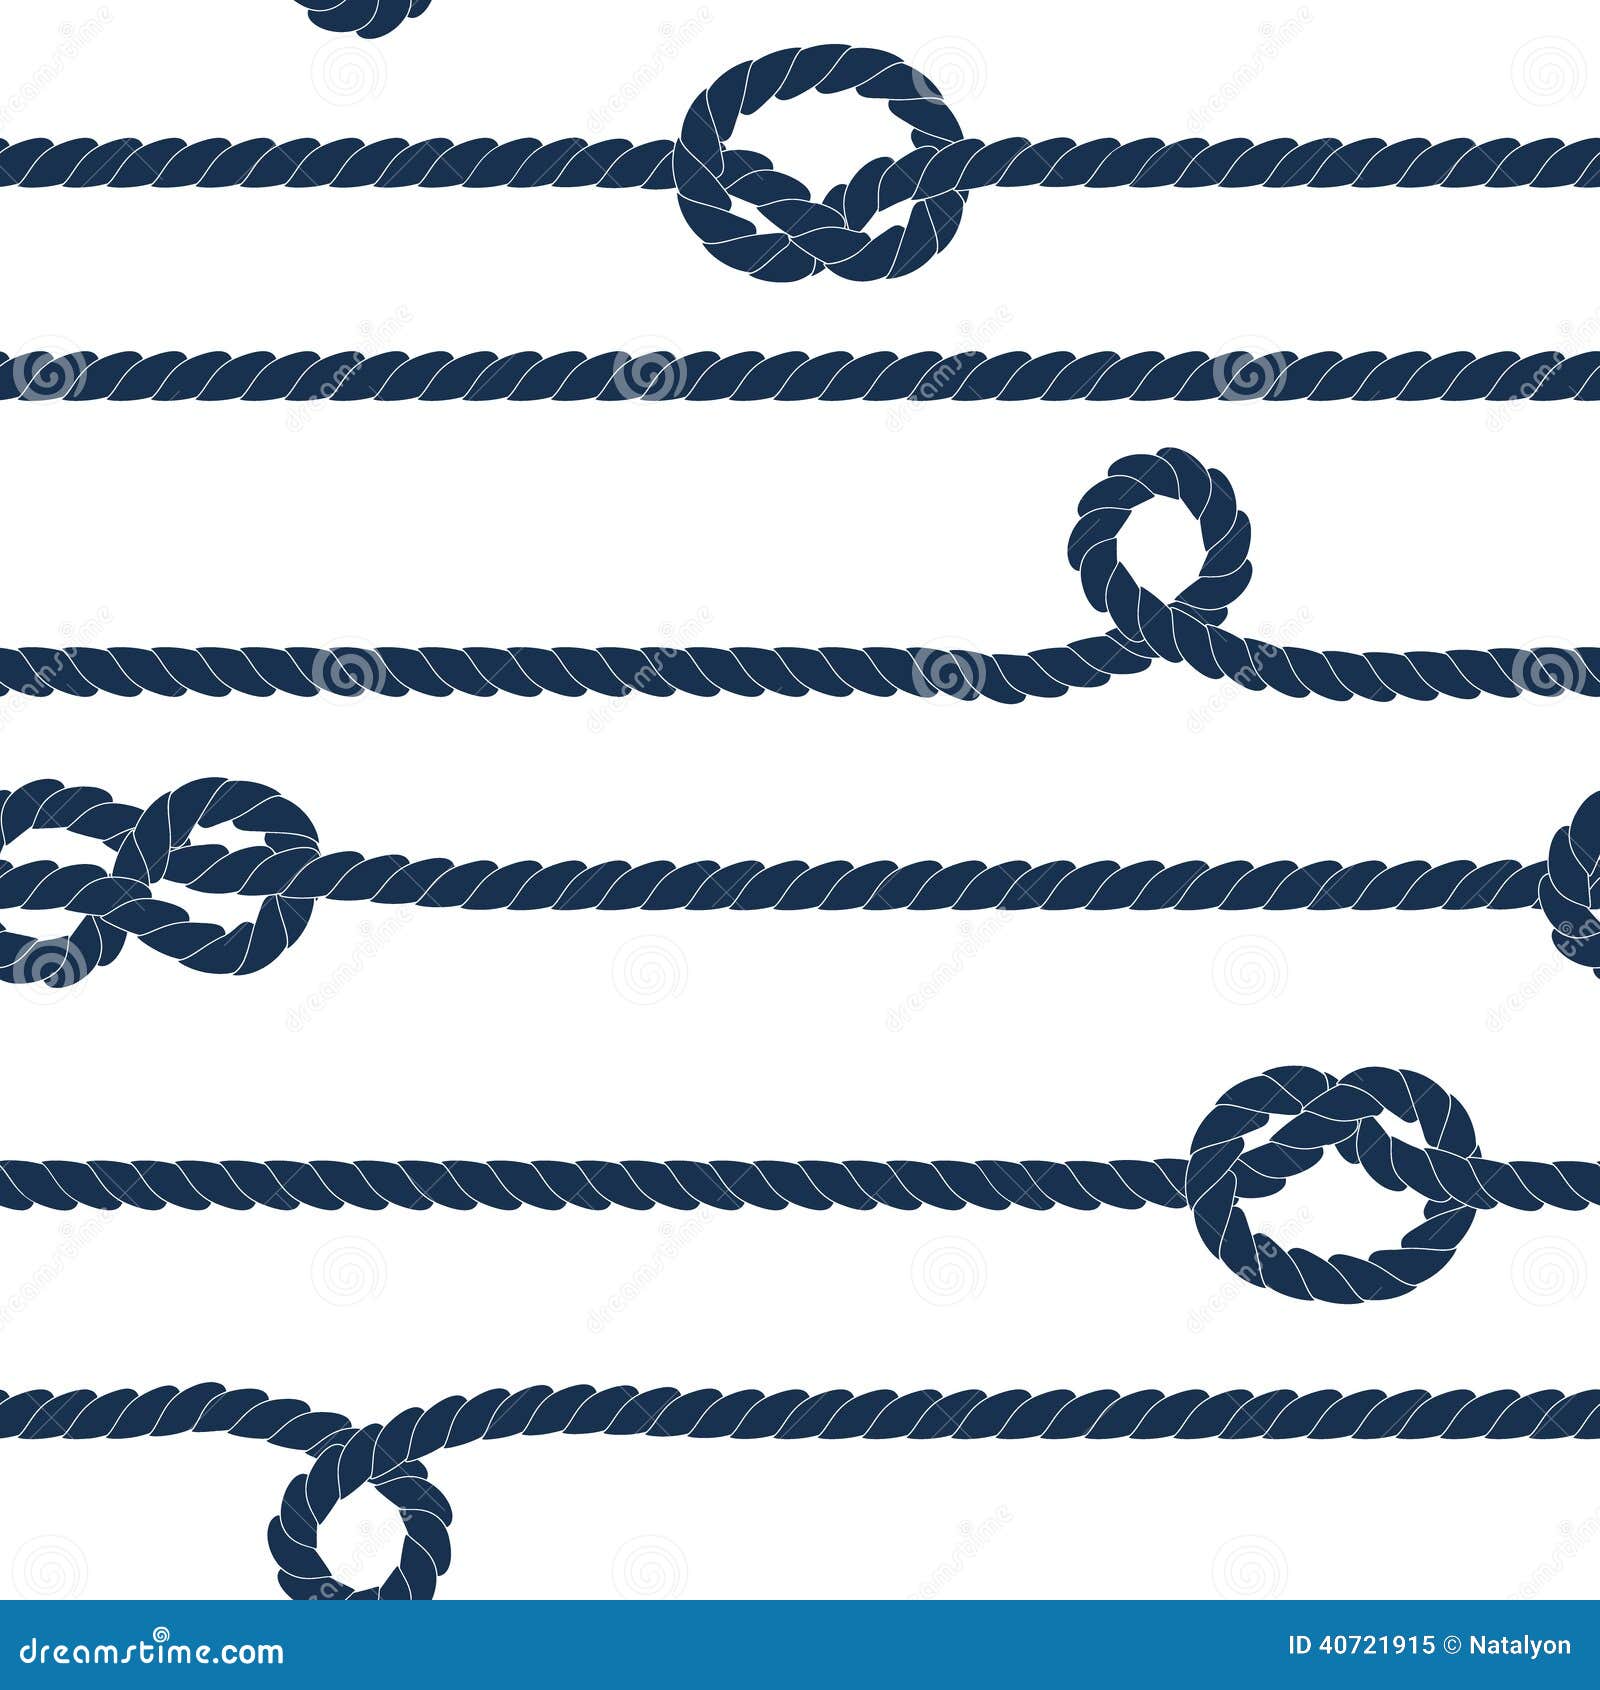 navy rope and marine knots striped seamless pattern in blue and white, 